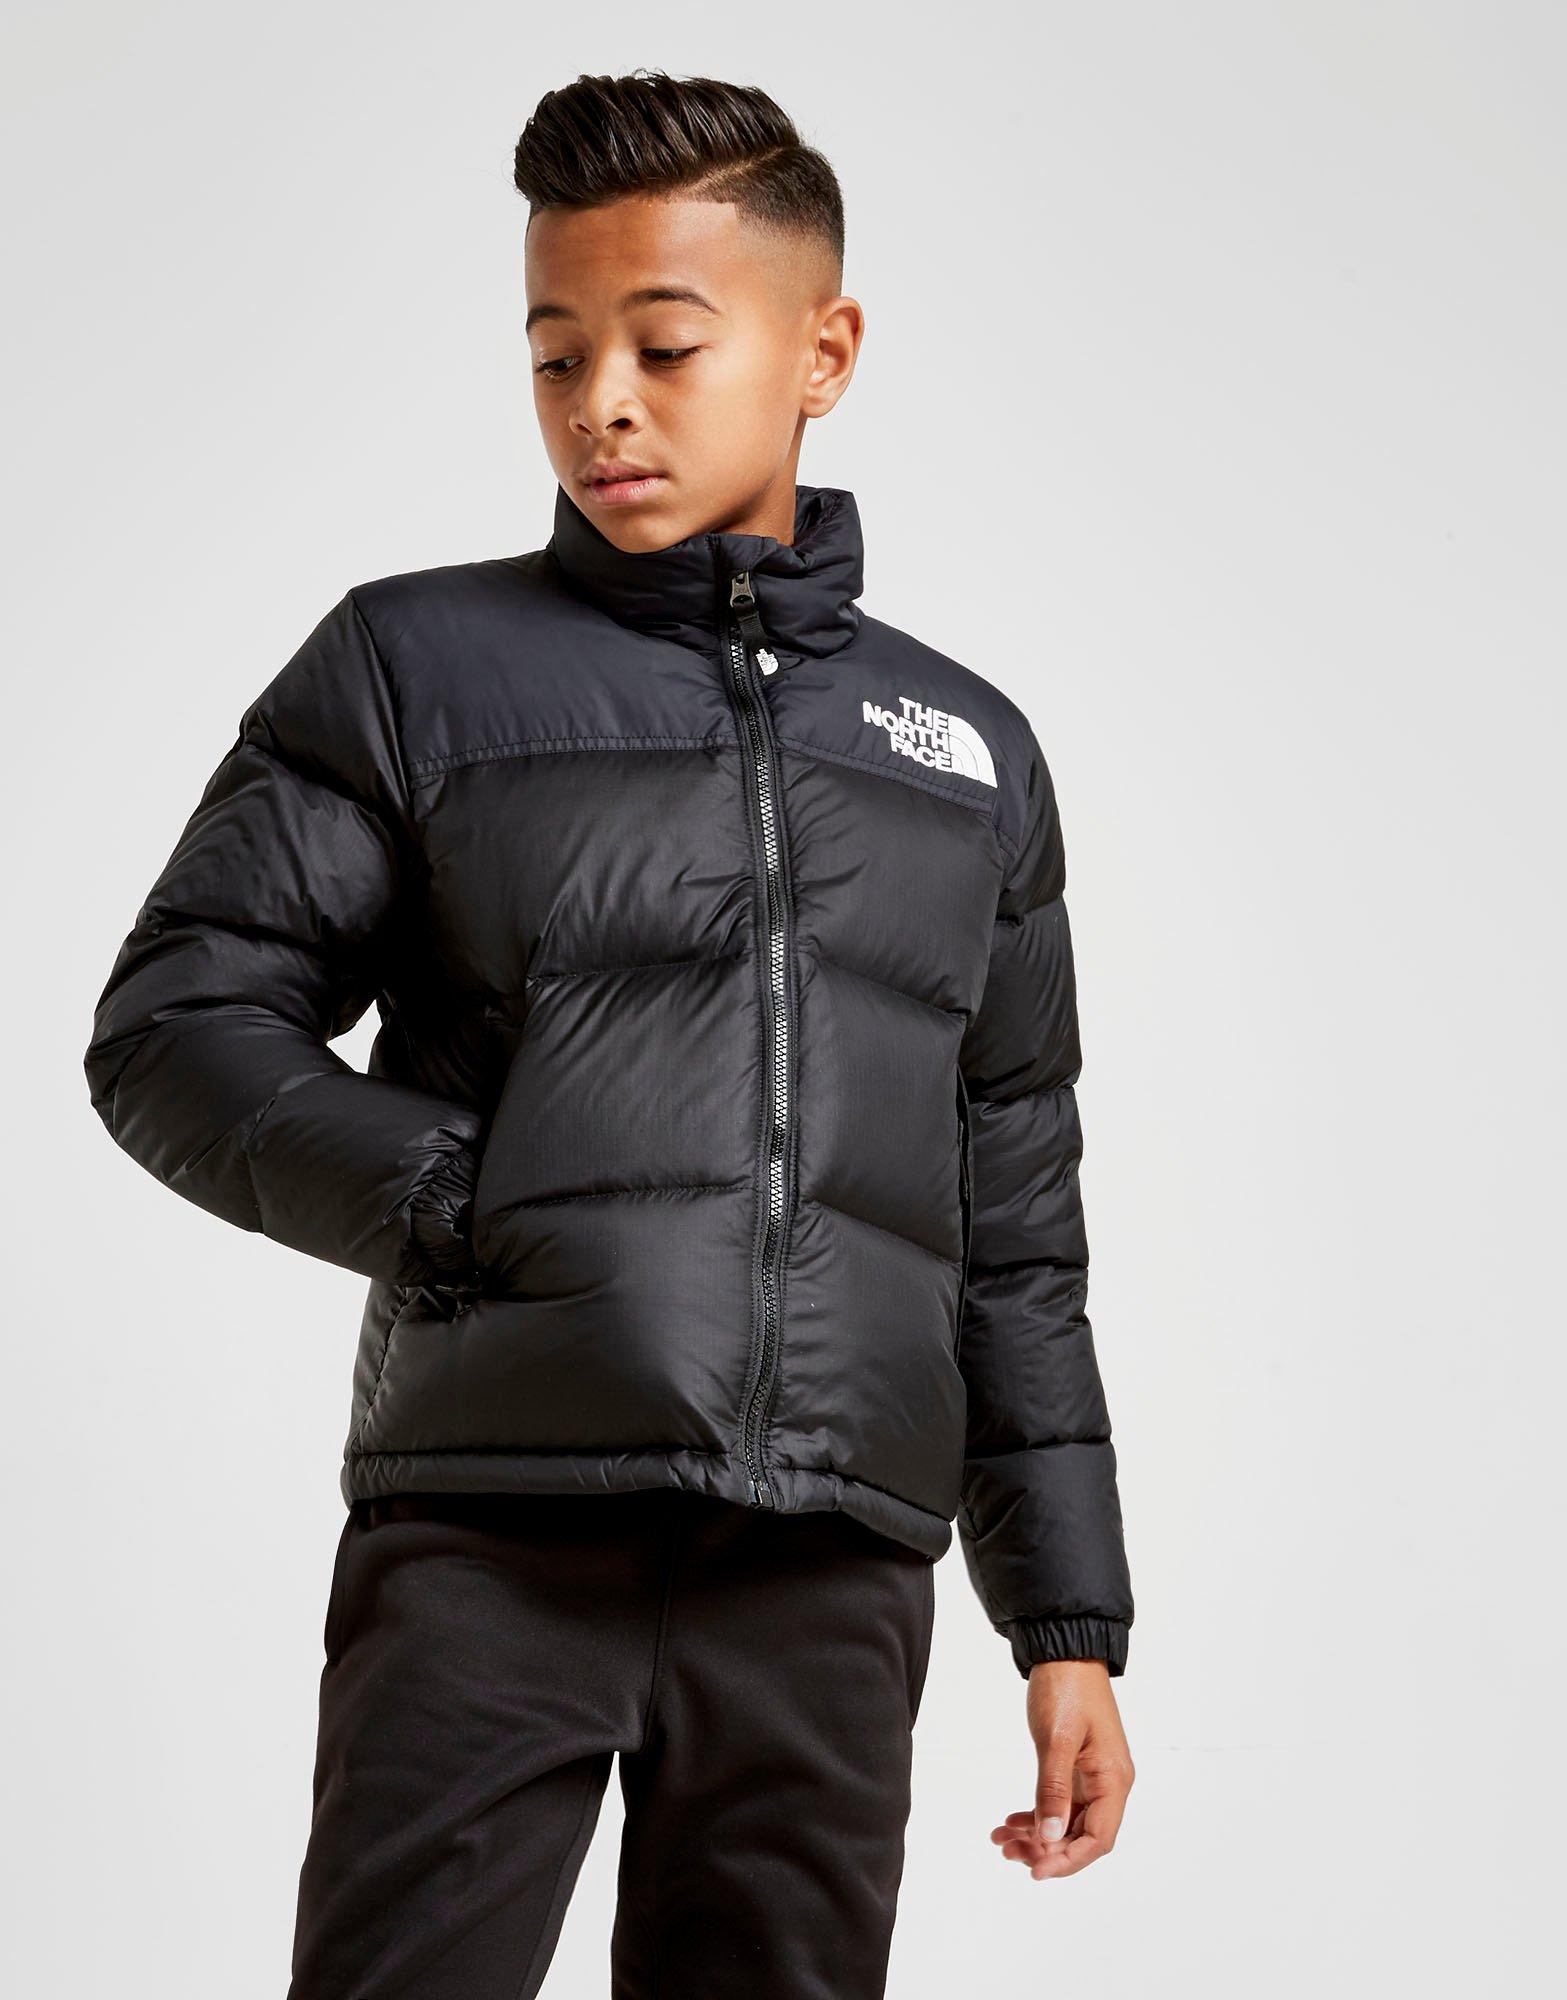 jd north face puffer jacket